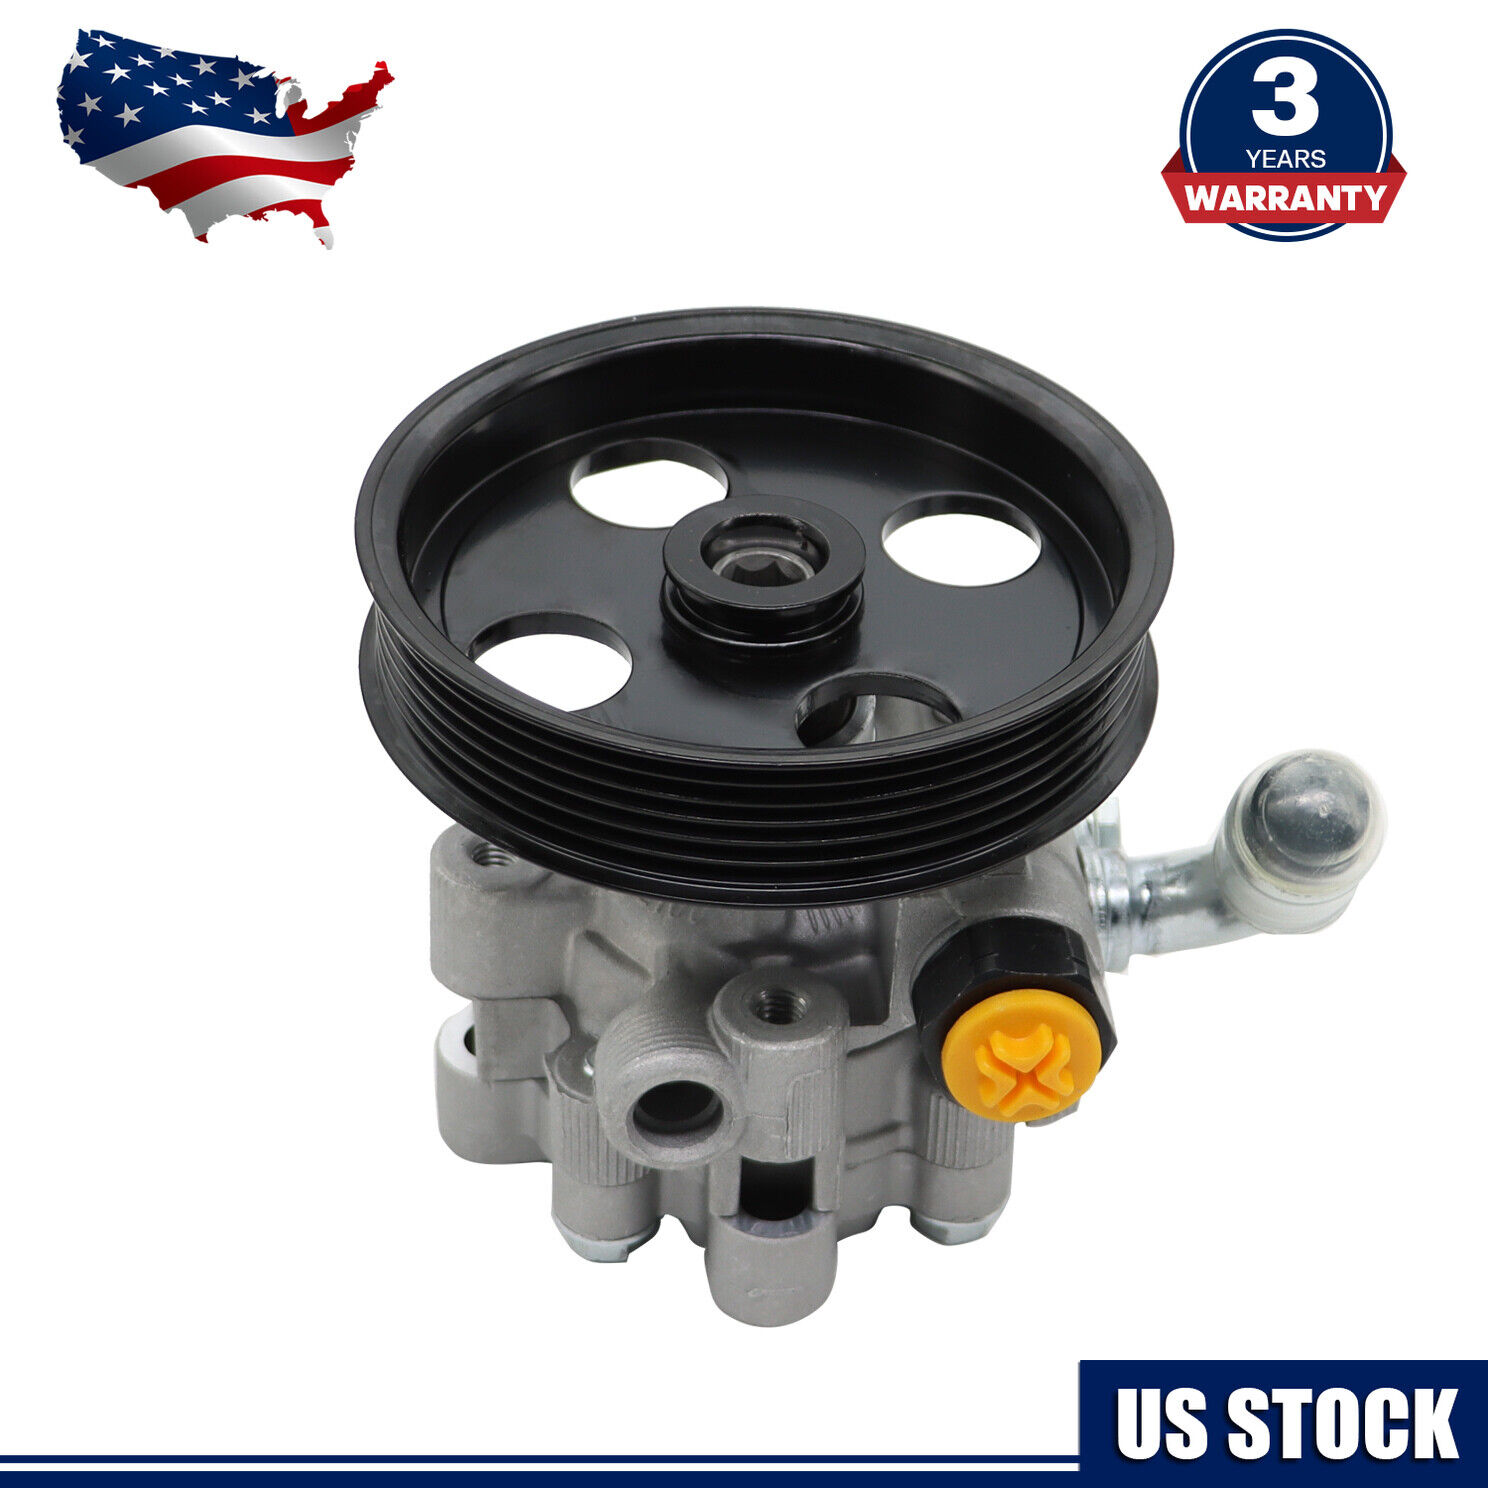 Power Steering Pump w/ Pulley for Chrysler 300 Dodge Challenger Charger Magnum